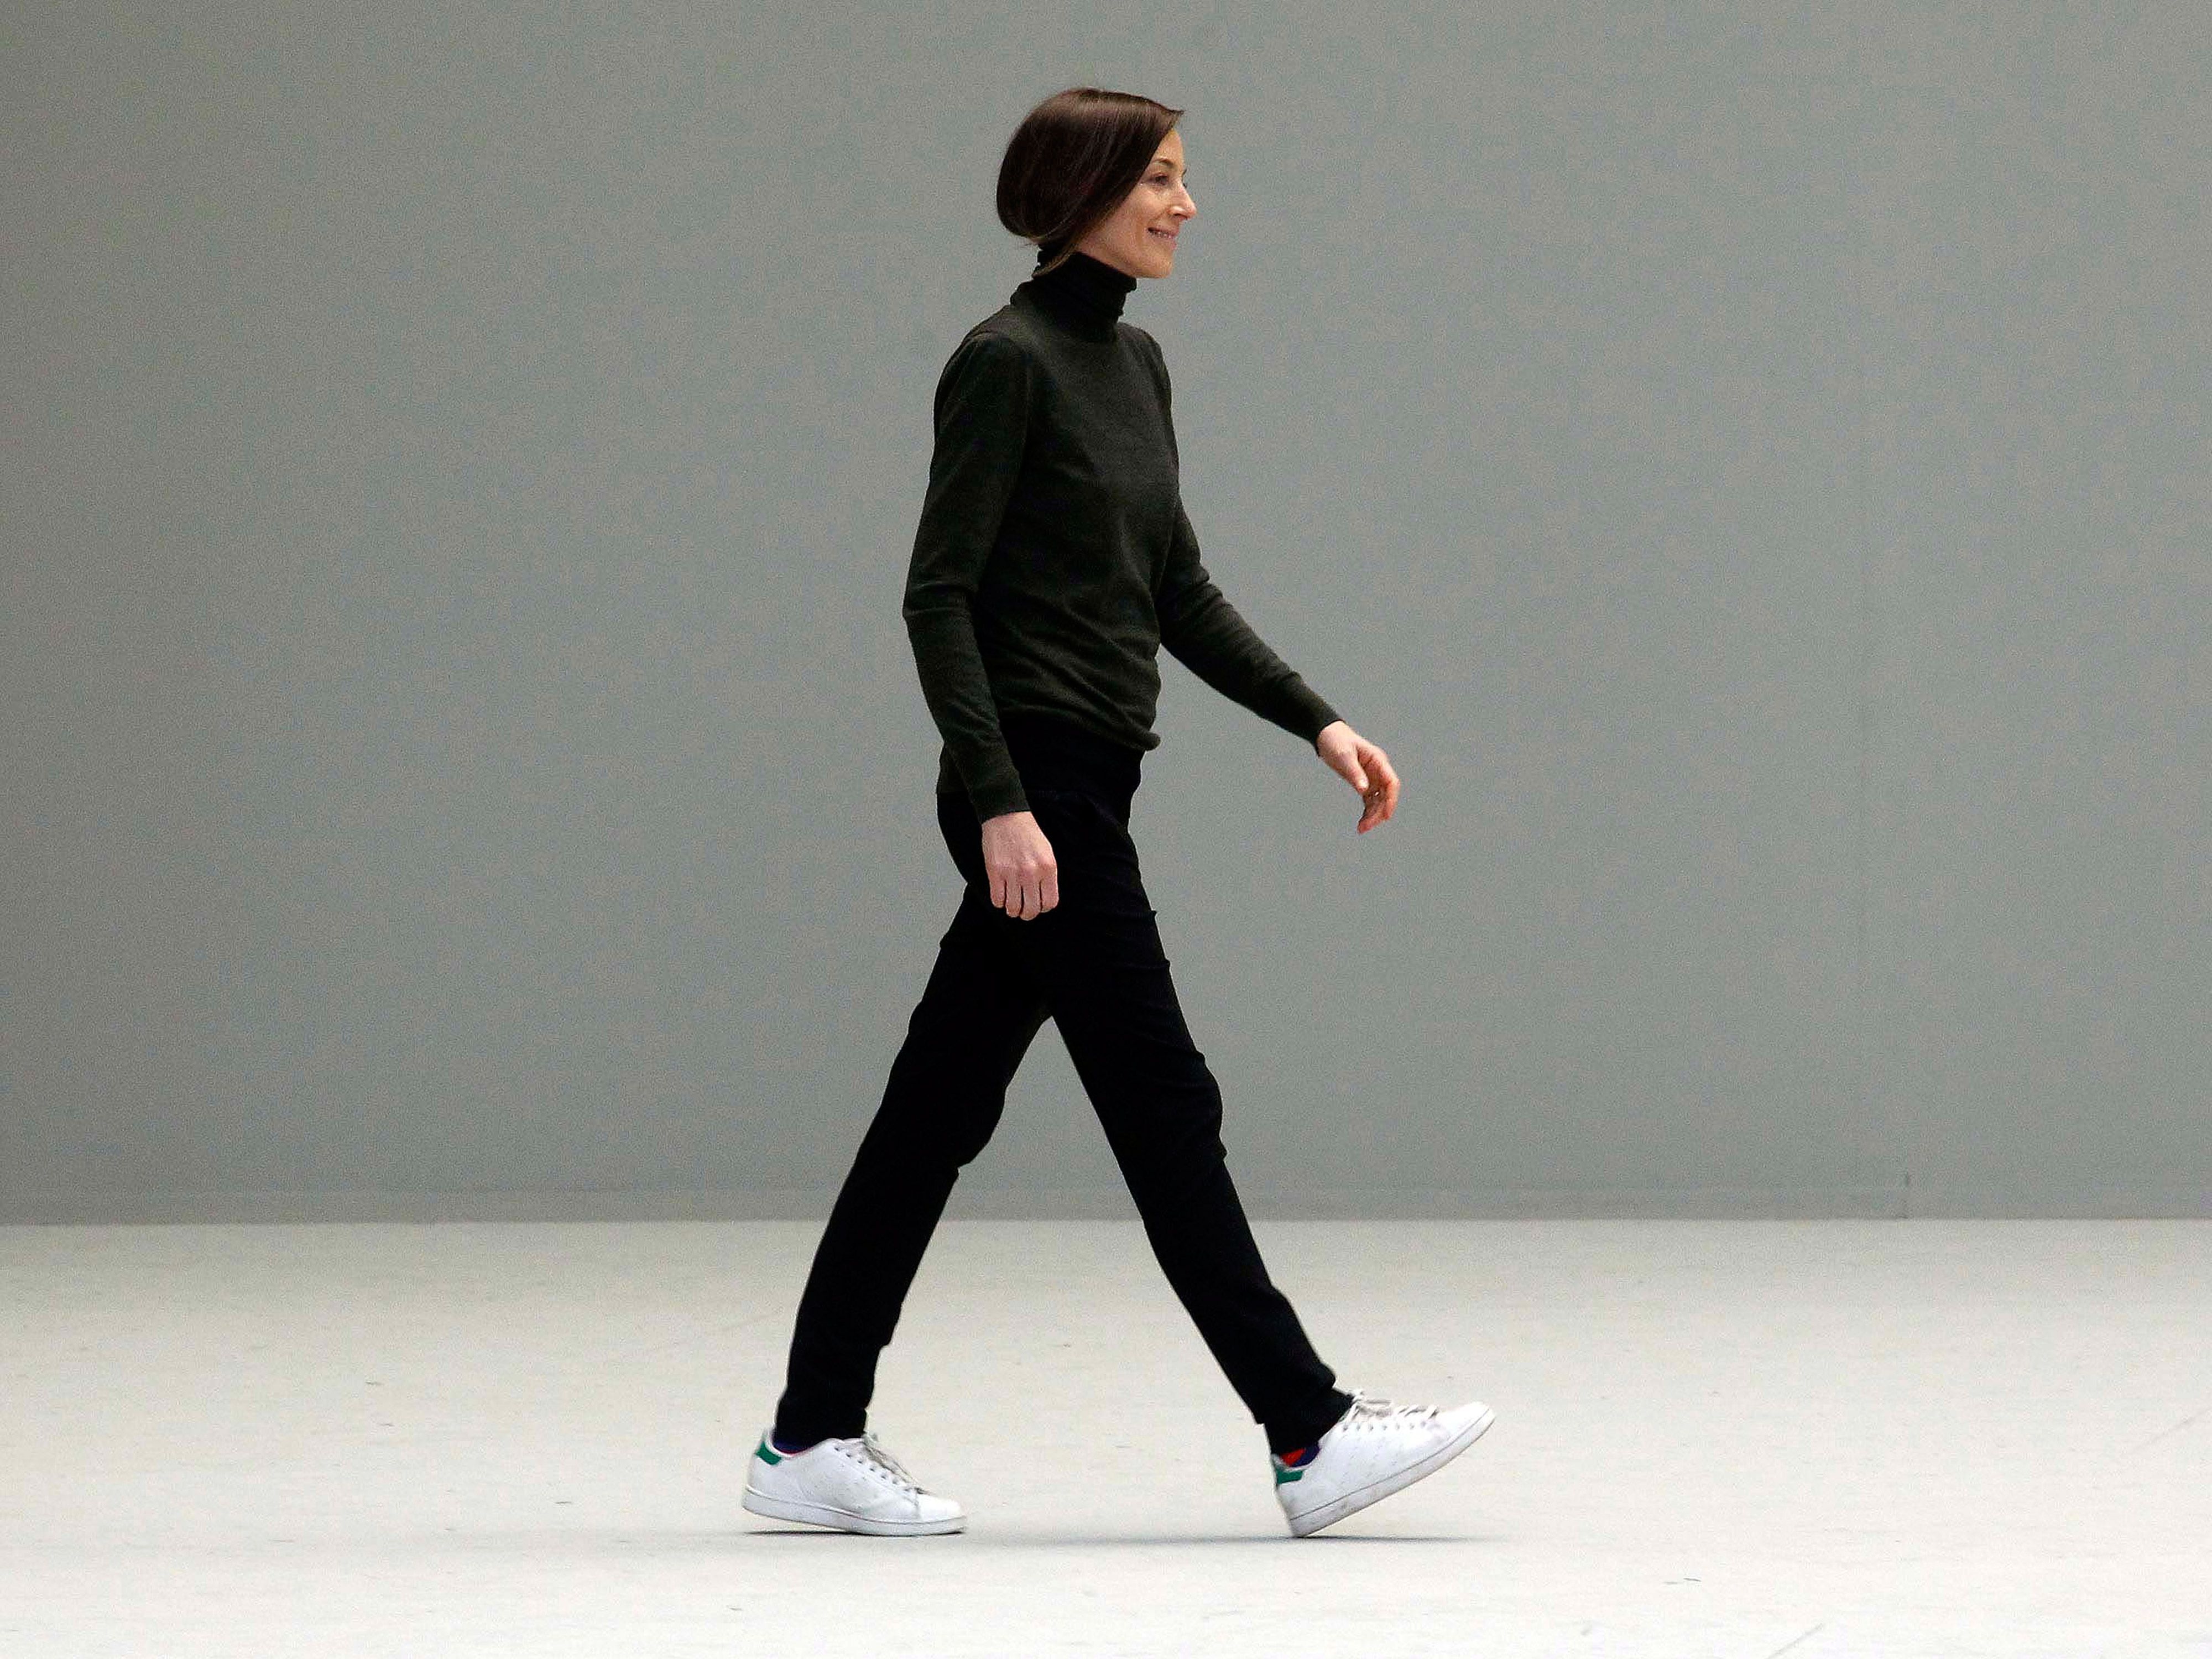 Phoebe Philo's Parting Gift: The Wildest Céline Shoe of Them All